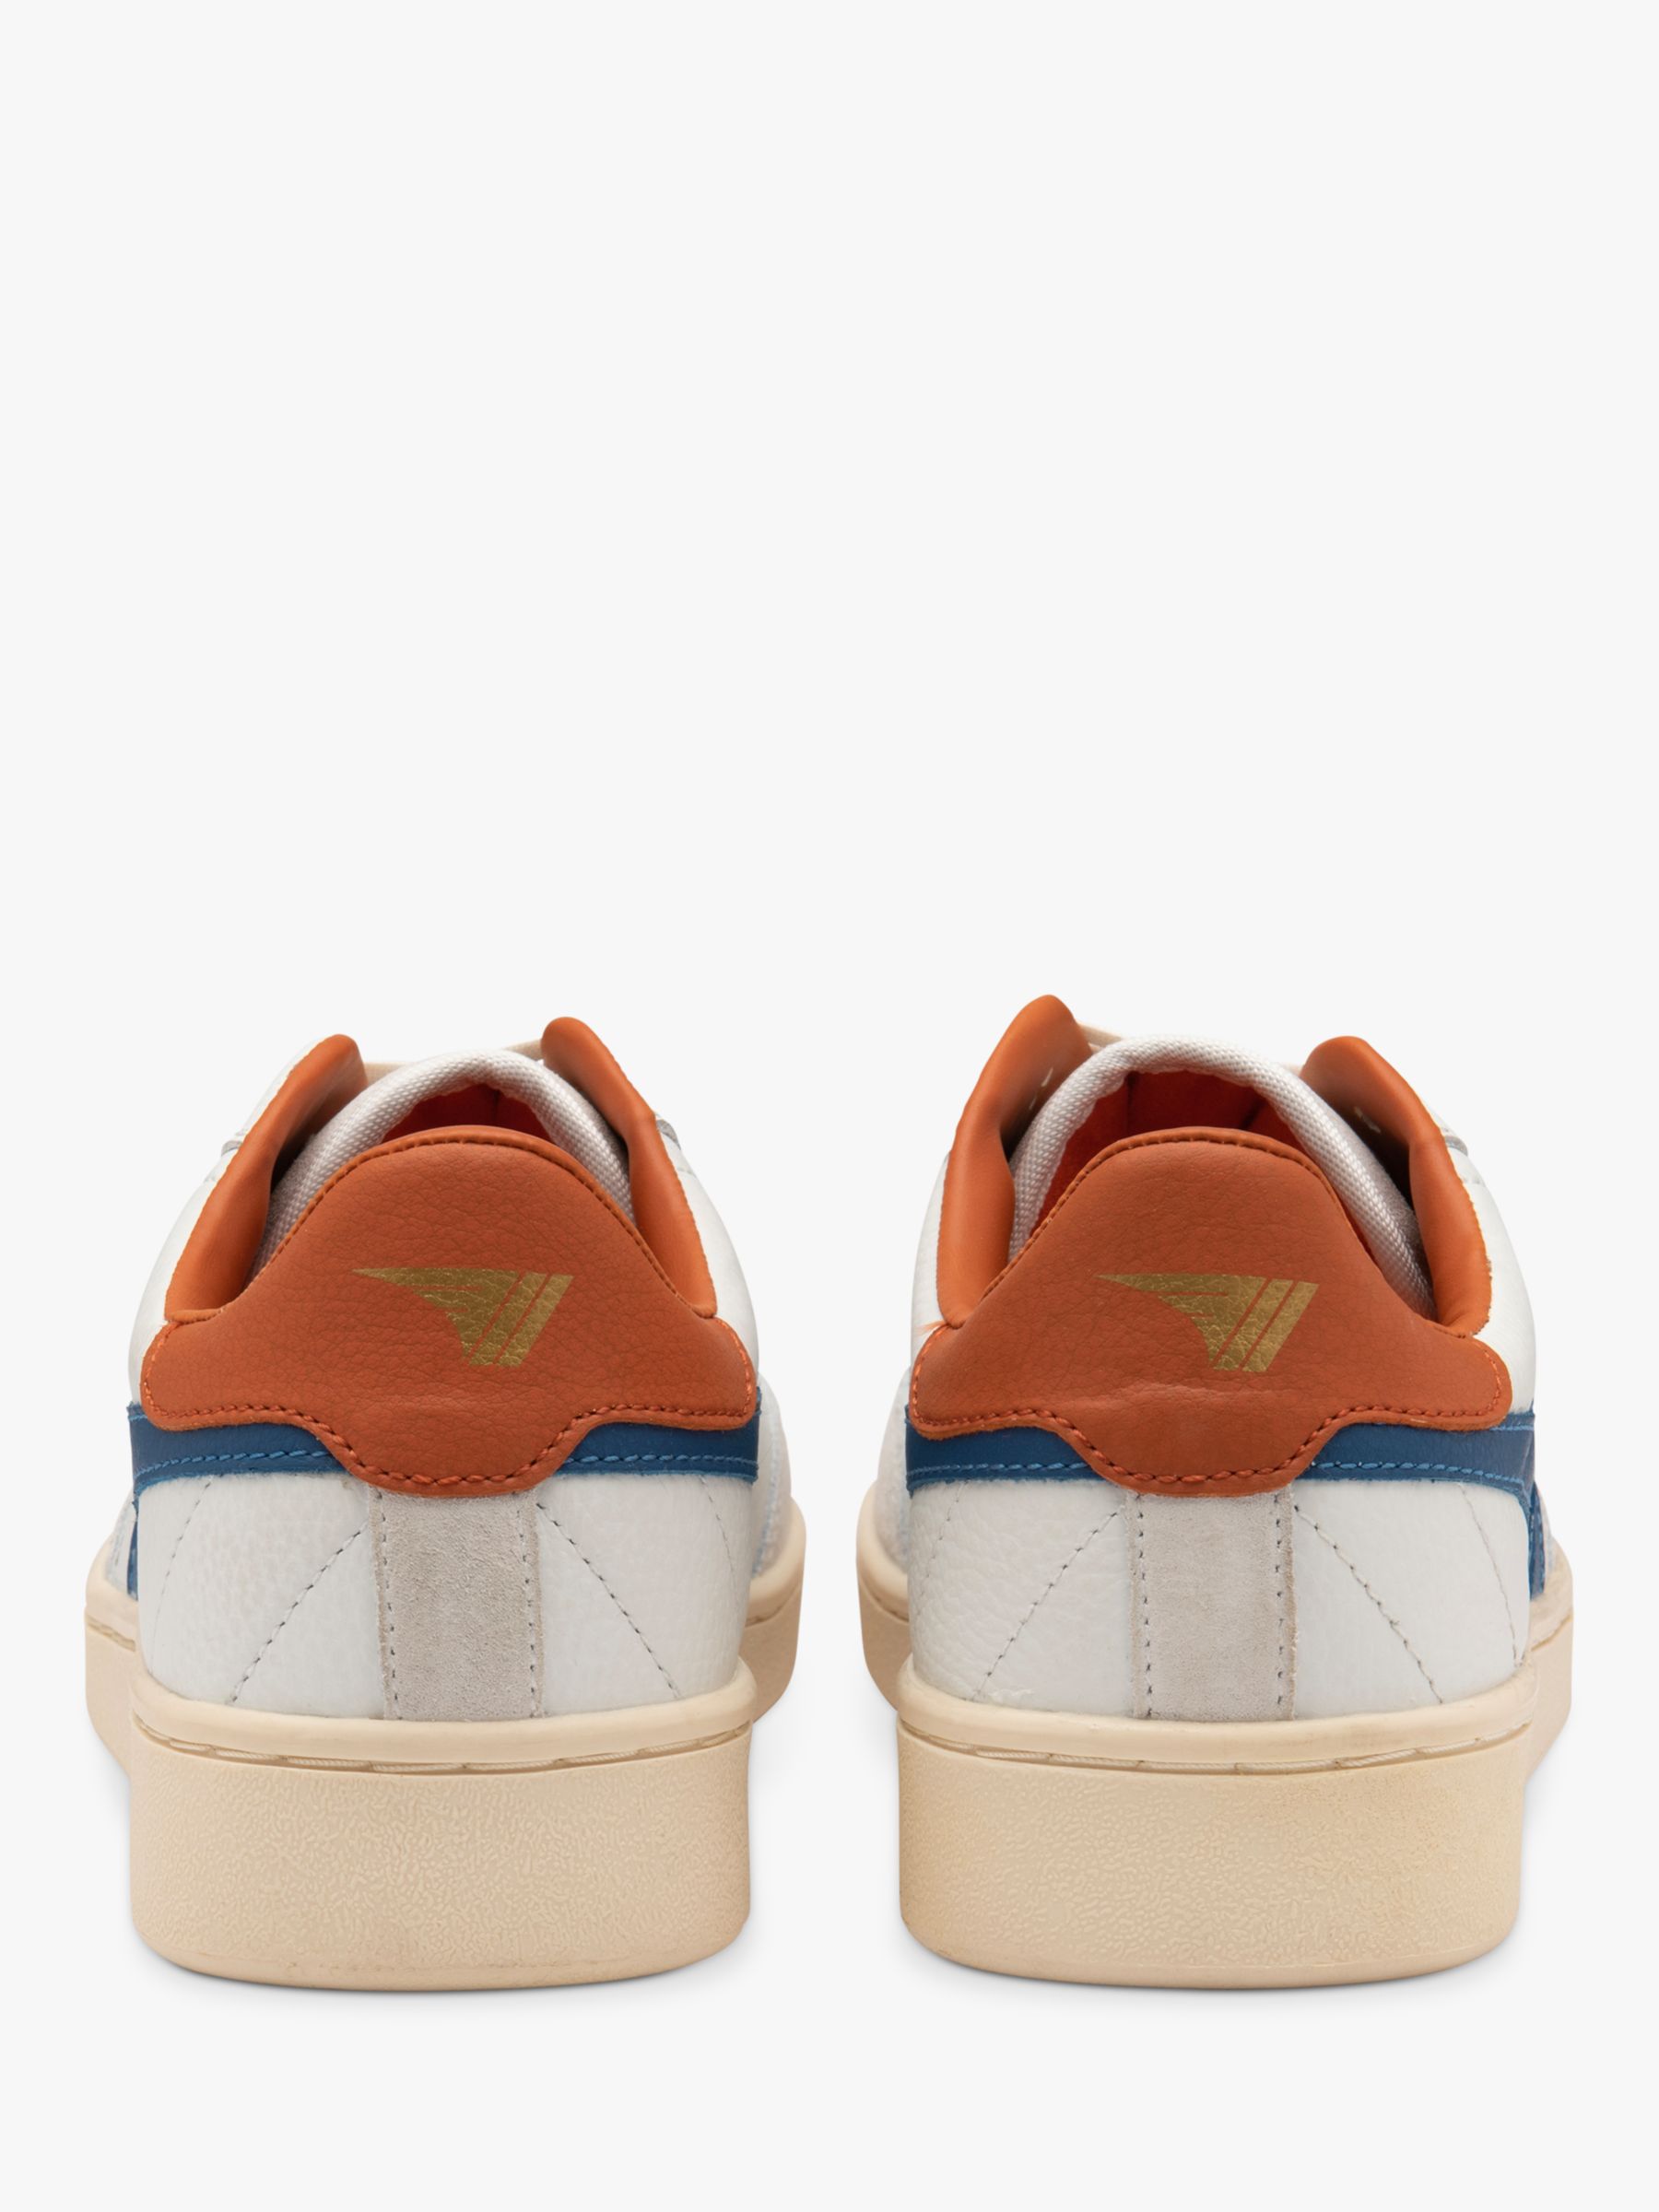 Buy Gola Classics Contact Leather Lace Up Trainers Online at johnlewis.com